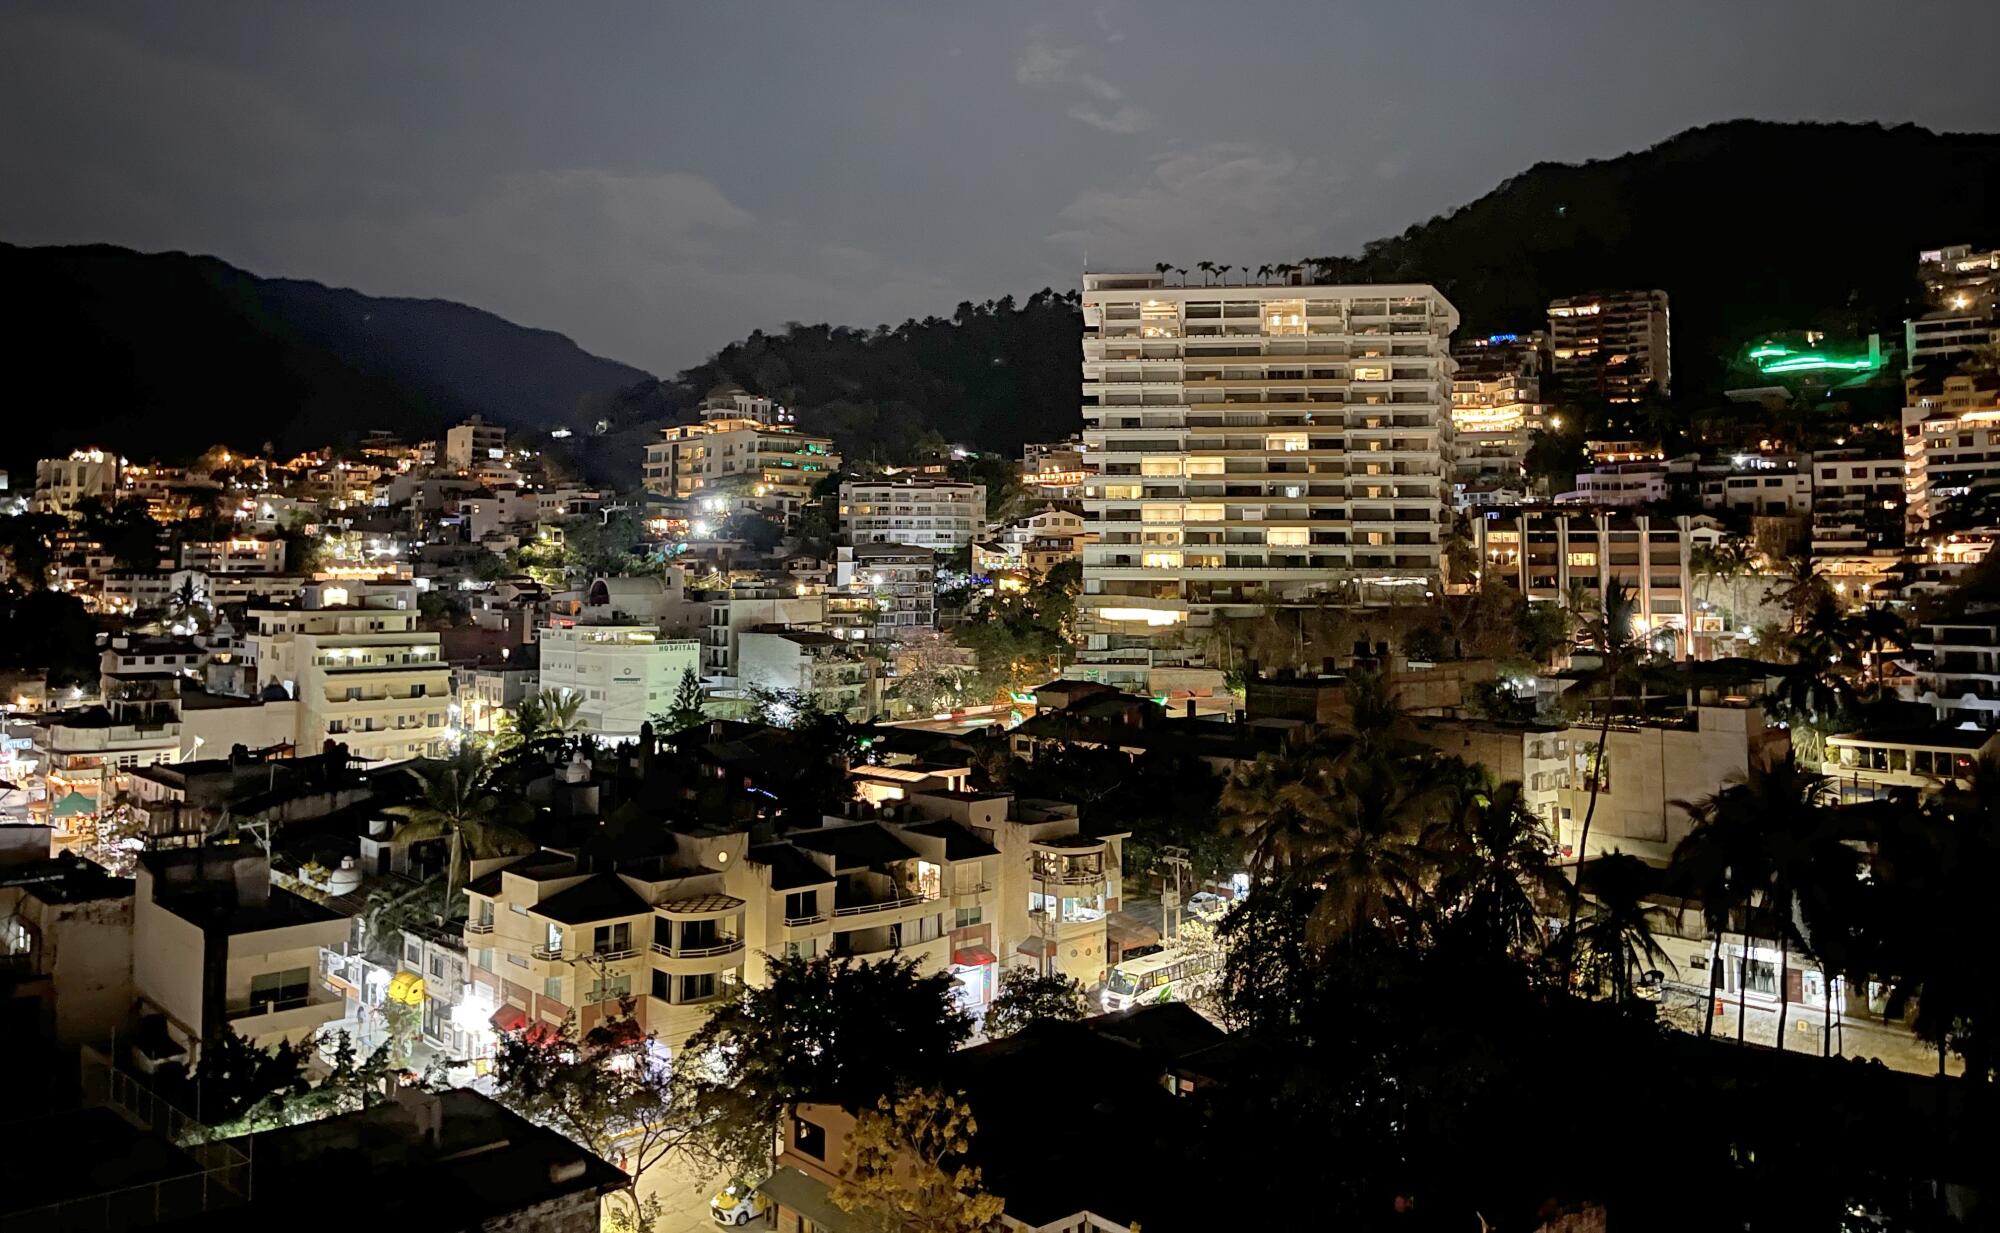 Nightlife is a big draw in Puerto Vallarta, a popular beachside city in Mexico's Jalisco state.